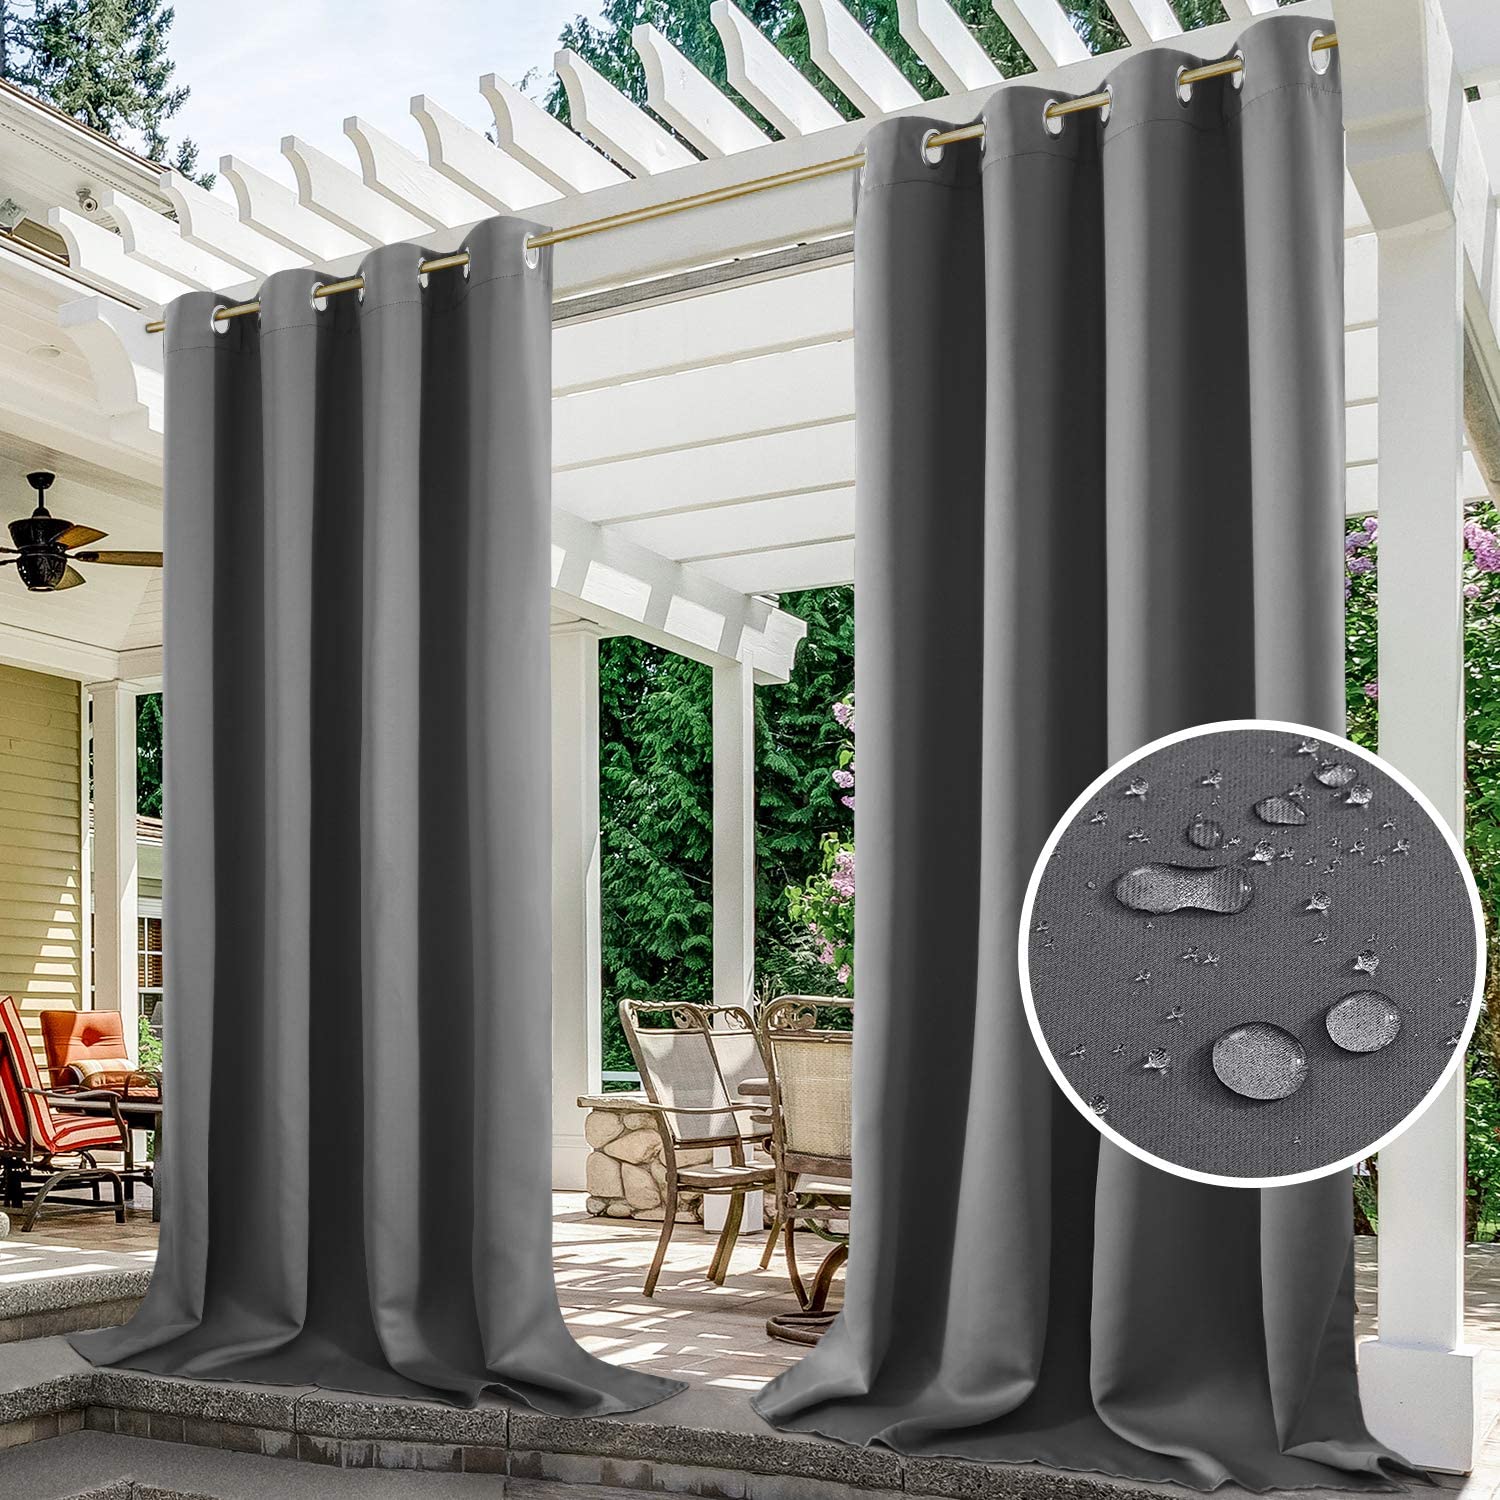 (2 Panel) Upgraded Outdoor Curtain Garden Patio Gazebo Sunscreen Blackout Curtains, Thermal Insulated White Curtains with Grommet | Waterproof& Windproof&UV-protection& Mildew Resistant,Grey 54*96in - image 1 of 7